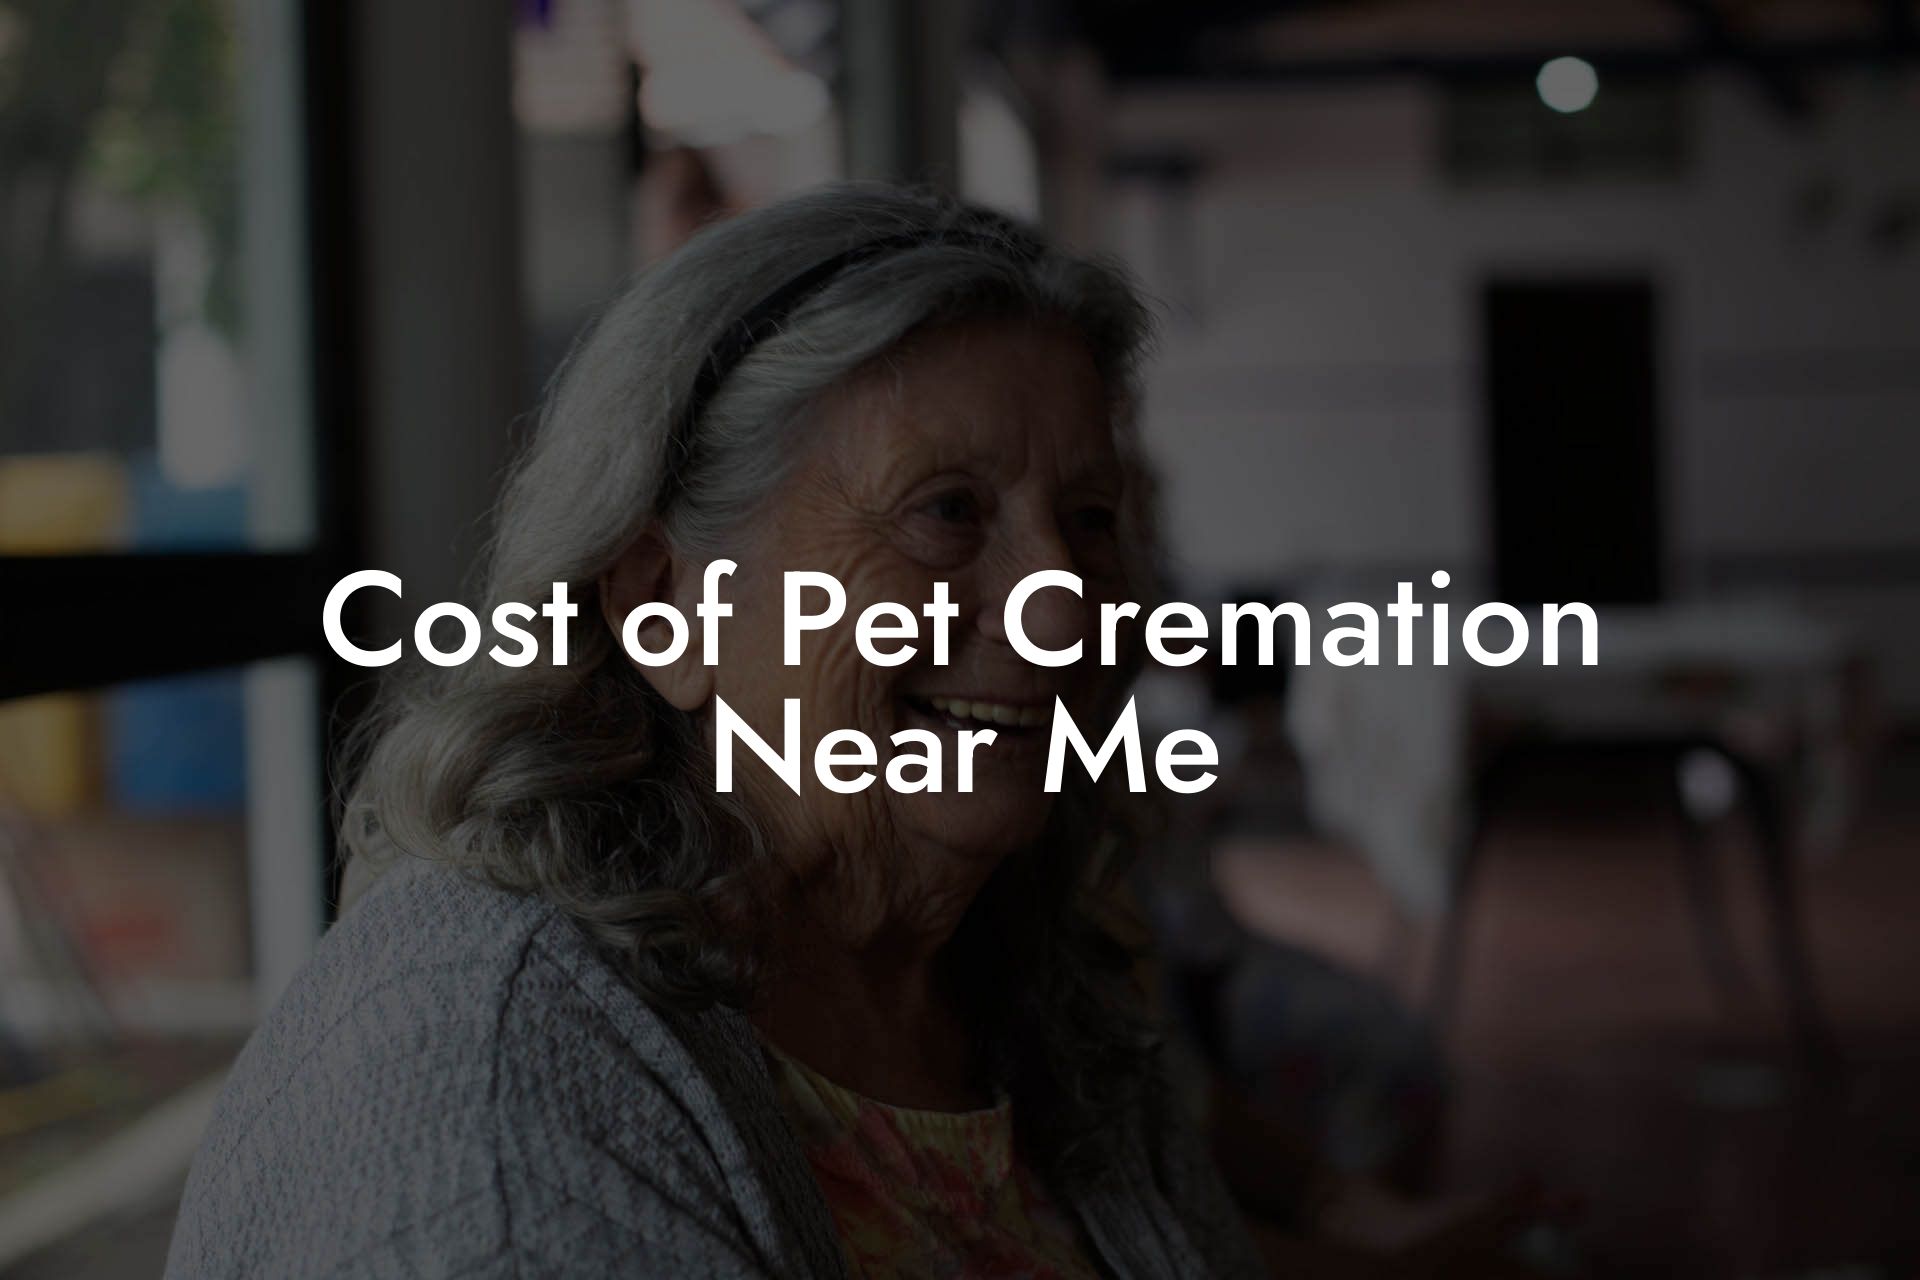 Cost of Pet Cremation Near Me